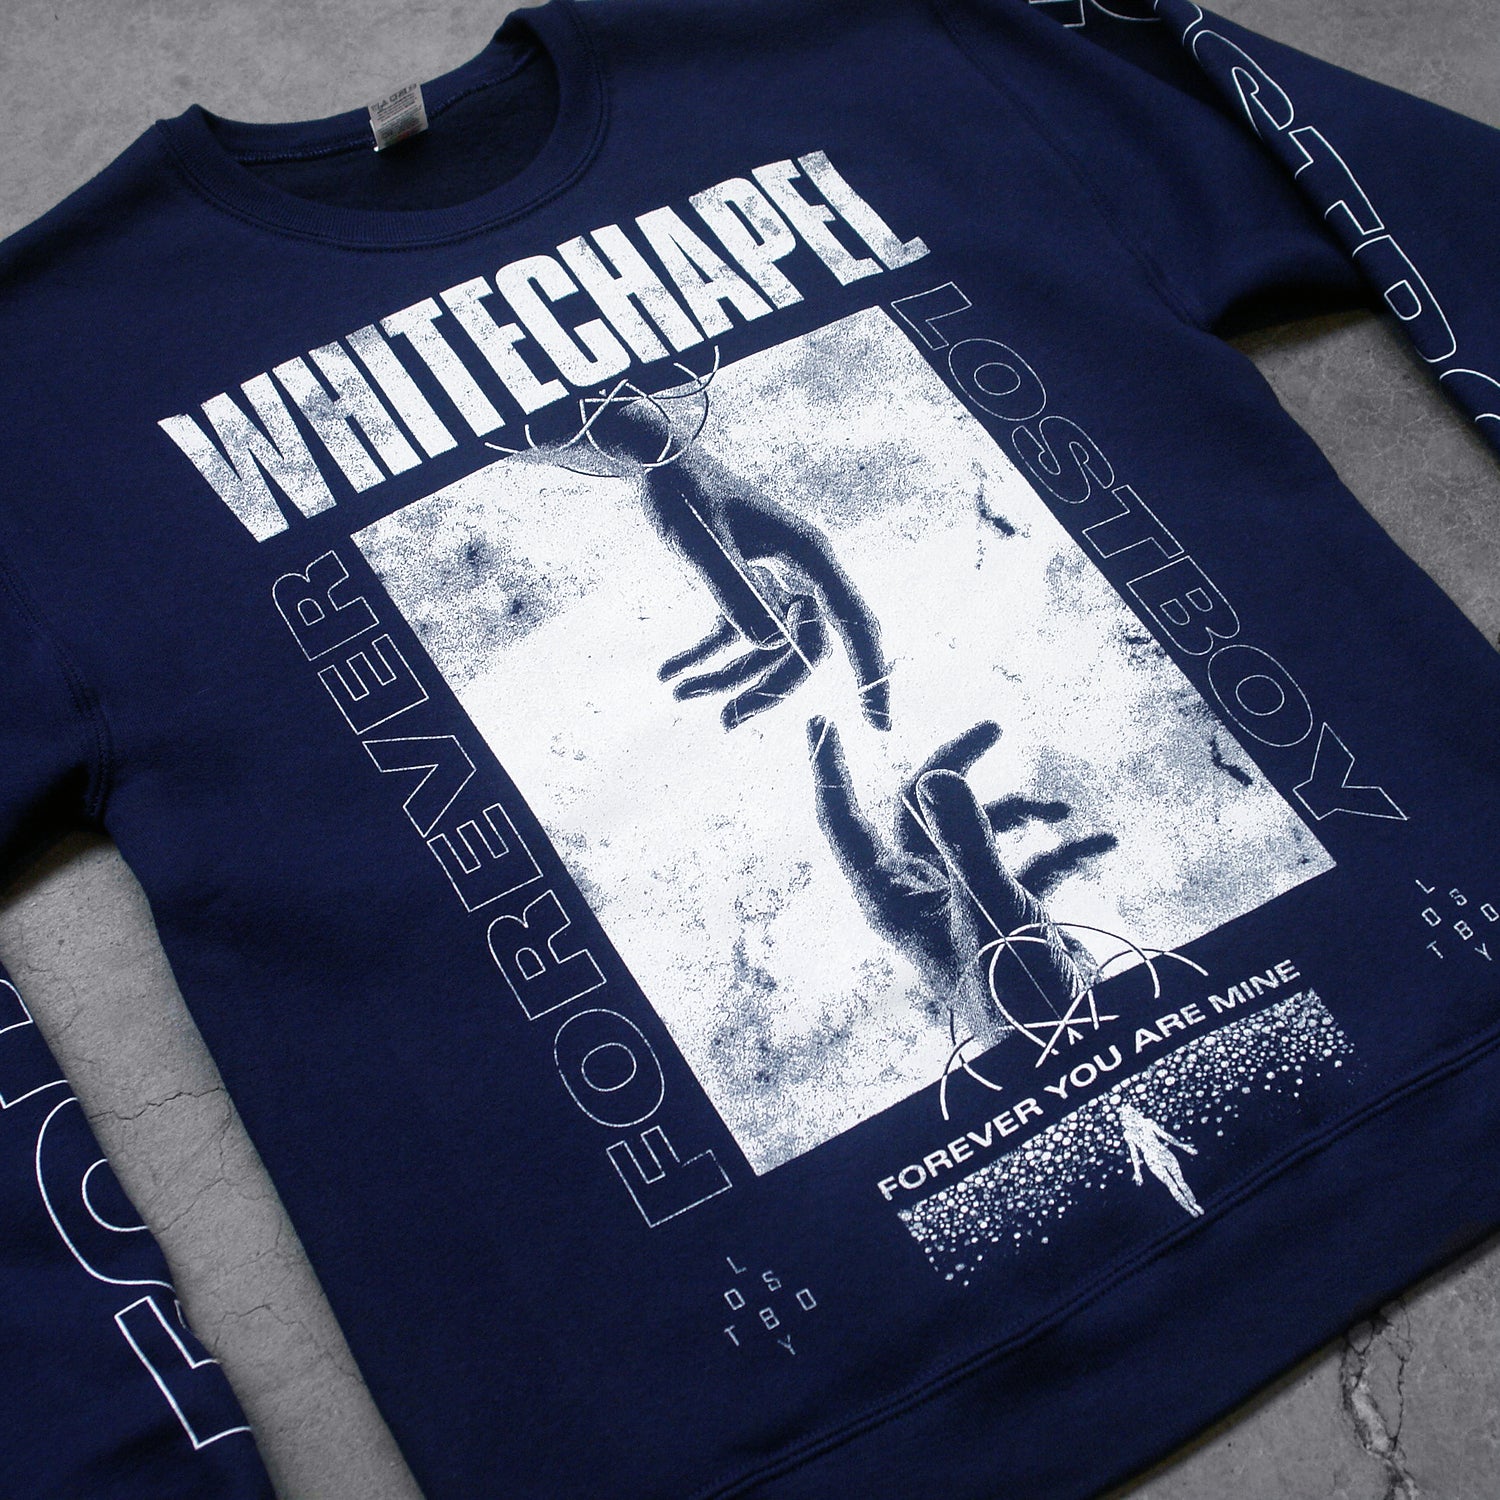 close up  Image of a black crewneck against a grey concrete background. Across the chest in white distressed text reads "whitechapel". below this is a white square with two hands reaching to touch each other from the top and bottom of the swuare. The sides of the swuare in white outline text reads forever lost boy. the bottom of the square in white text says forever you are mine with a white silhouette. the left sleeve says lost boy and the right sleeve says forever, both in an outlined white text.